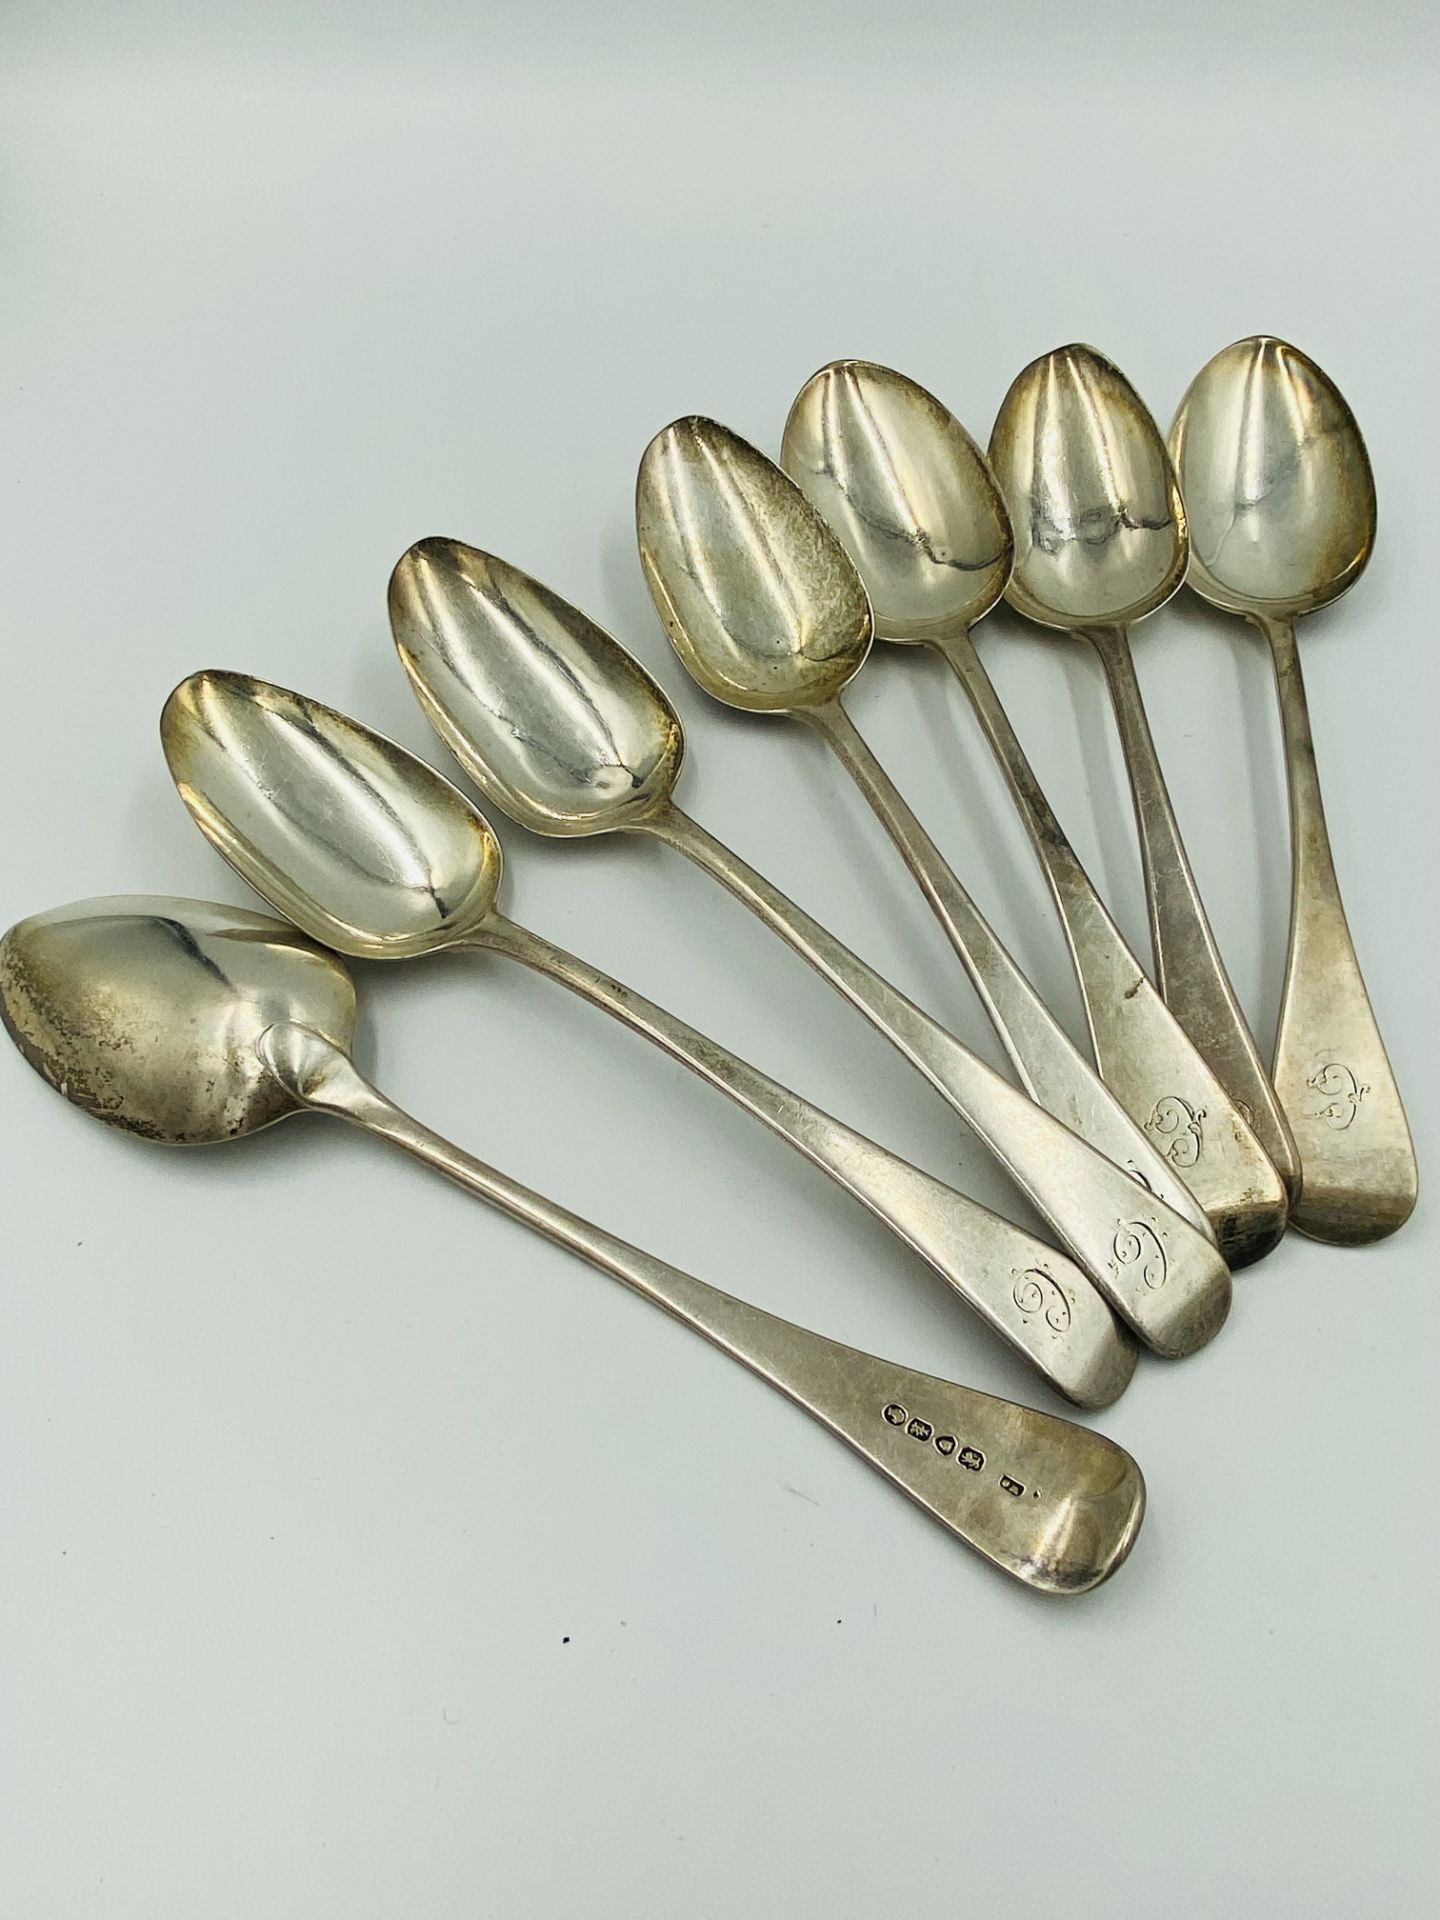 Seven silver spoons - Image 4 of 4